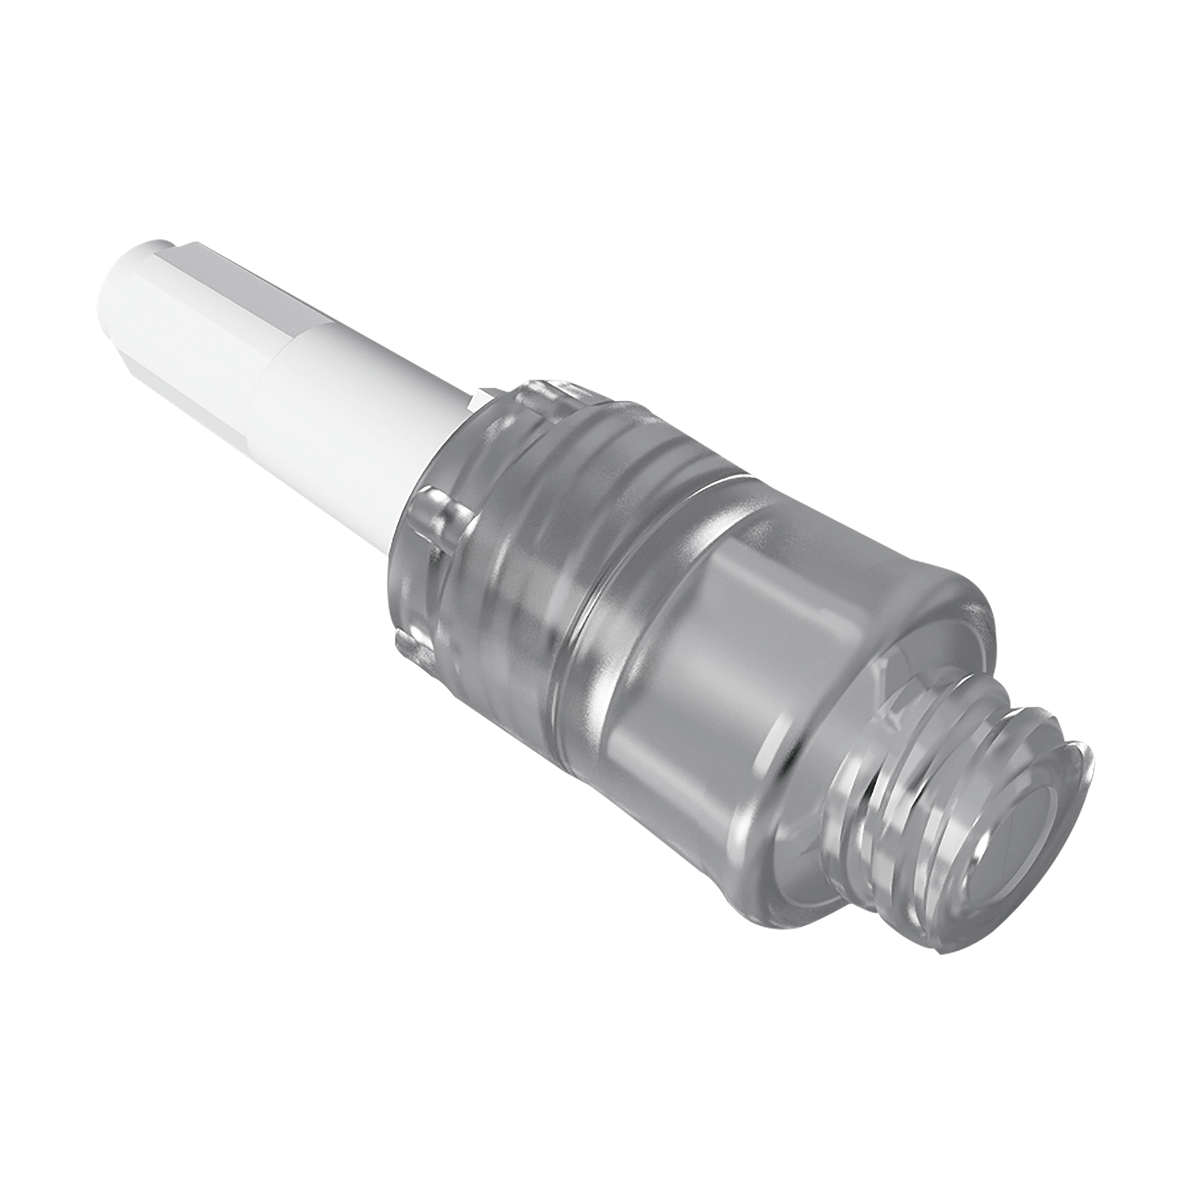 Needle-Free IV Connector Technology